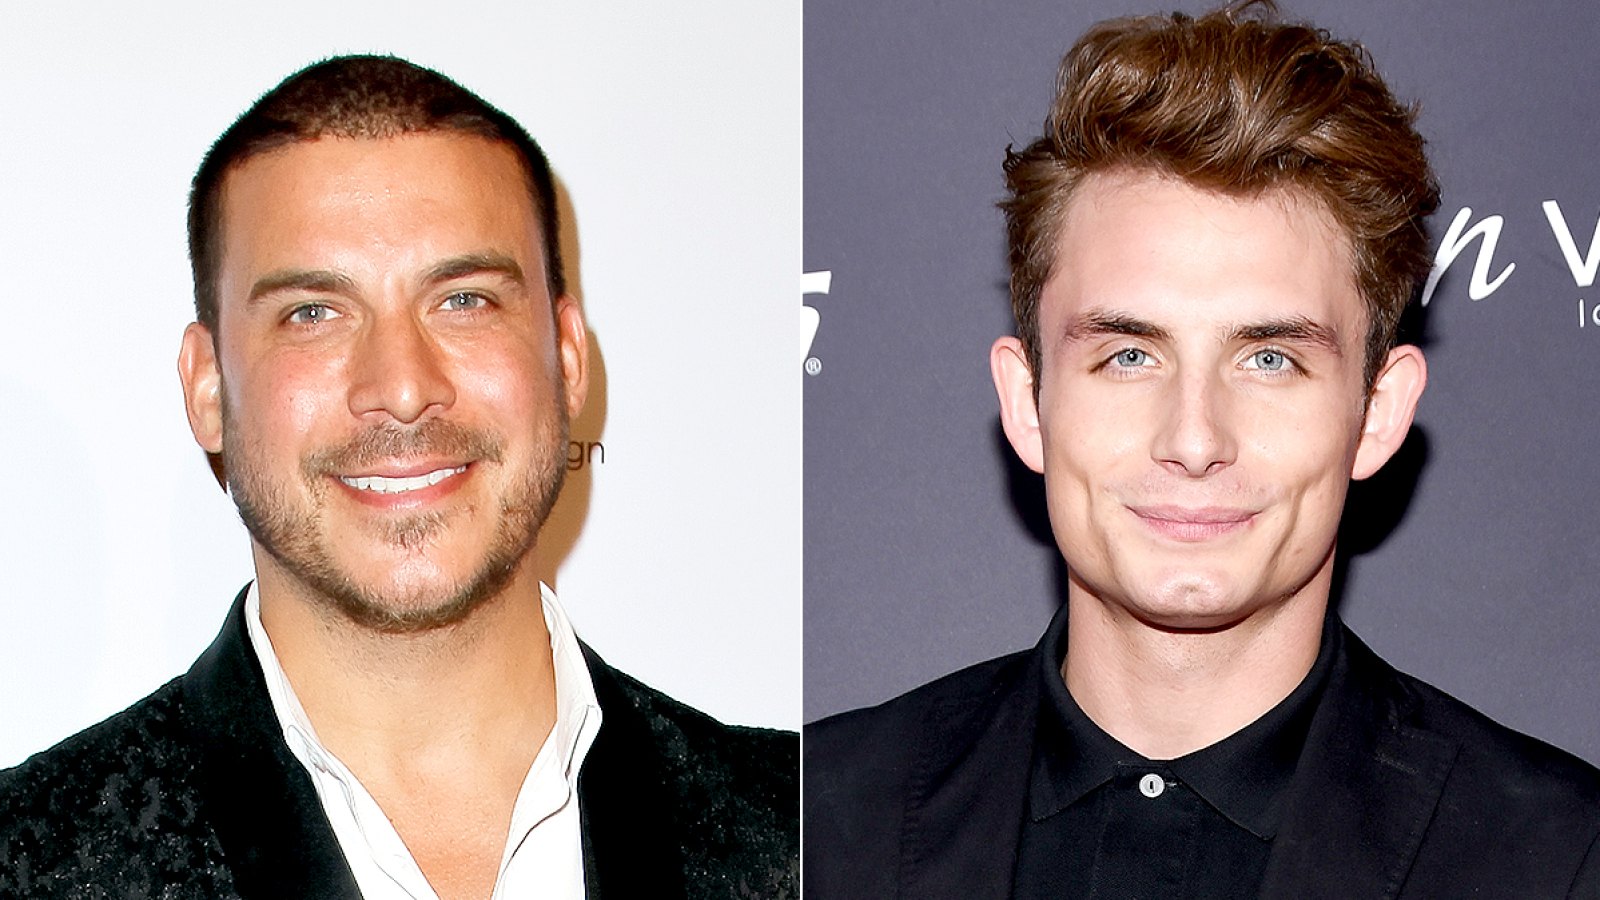 Jax Taylor and James Kennedy